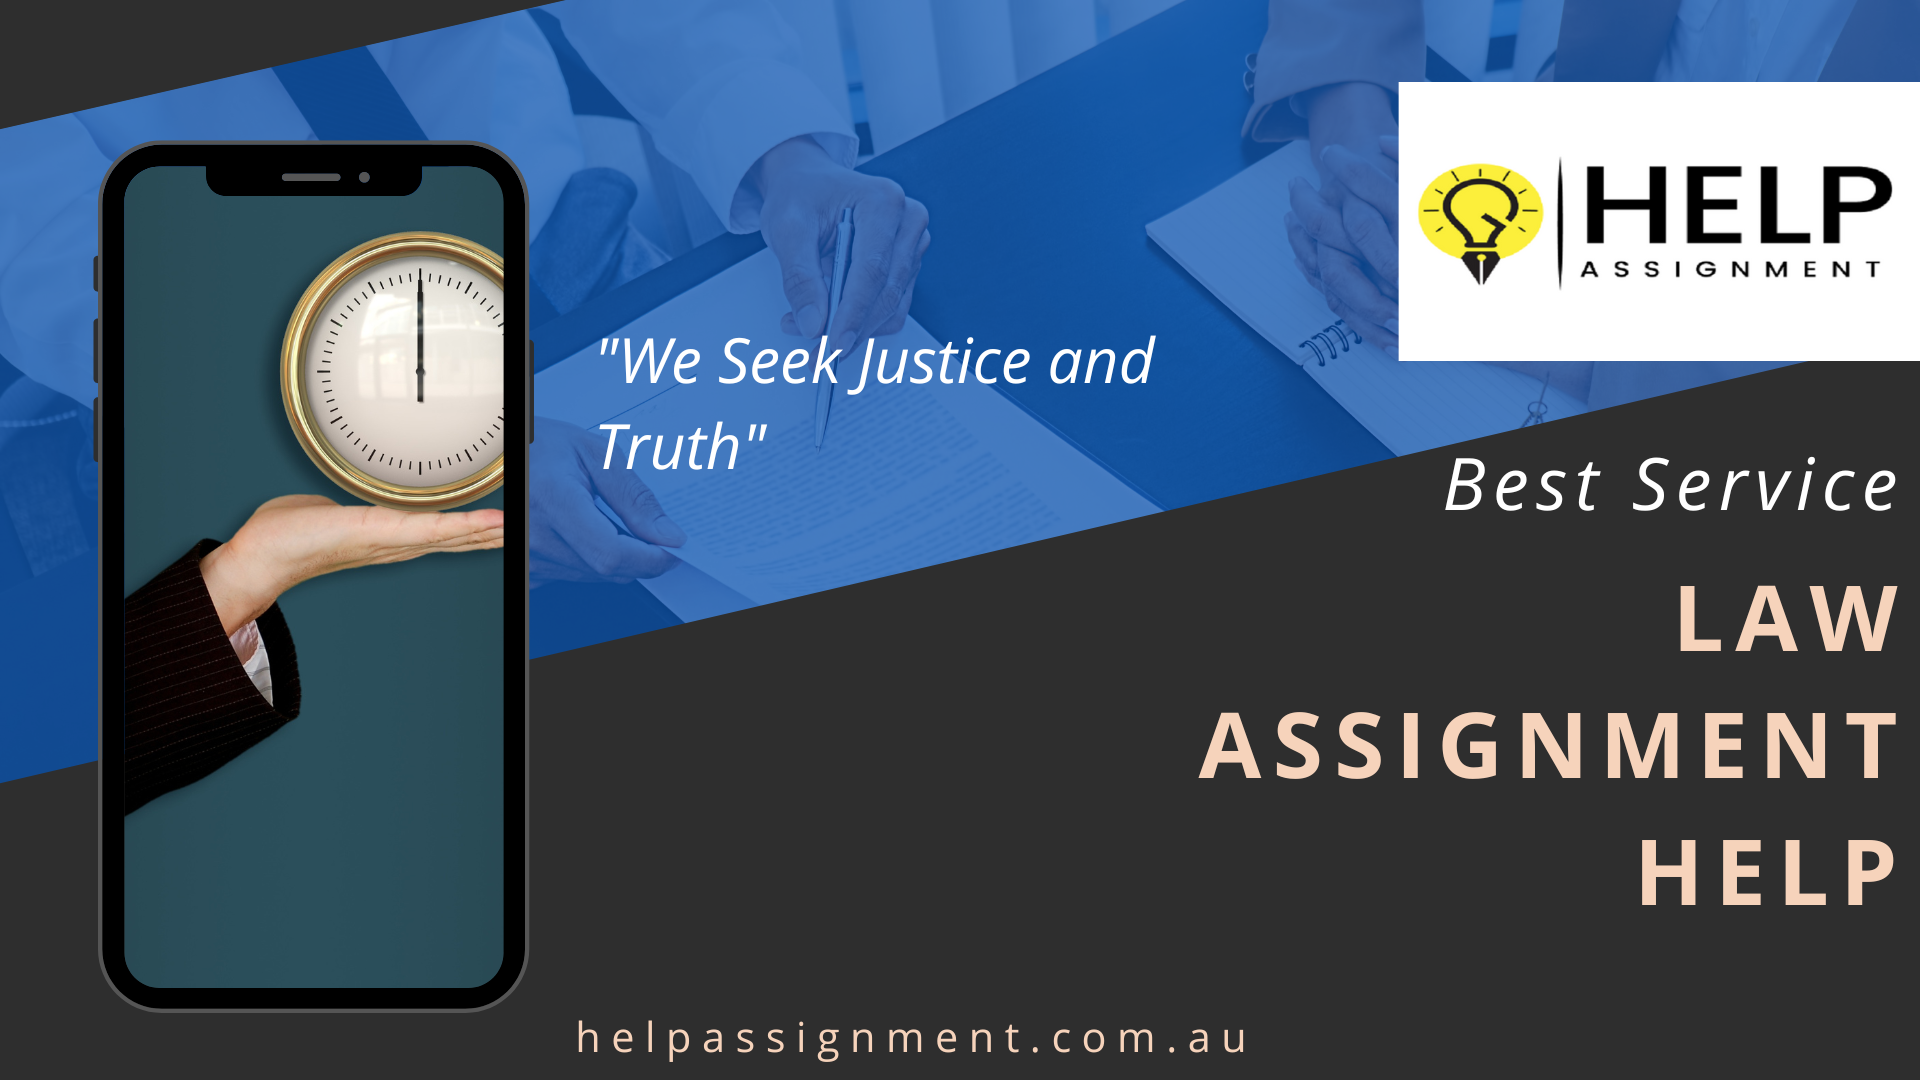 How To Choose The Right Law Assignment Help Provider?